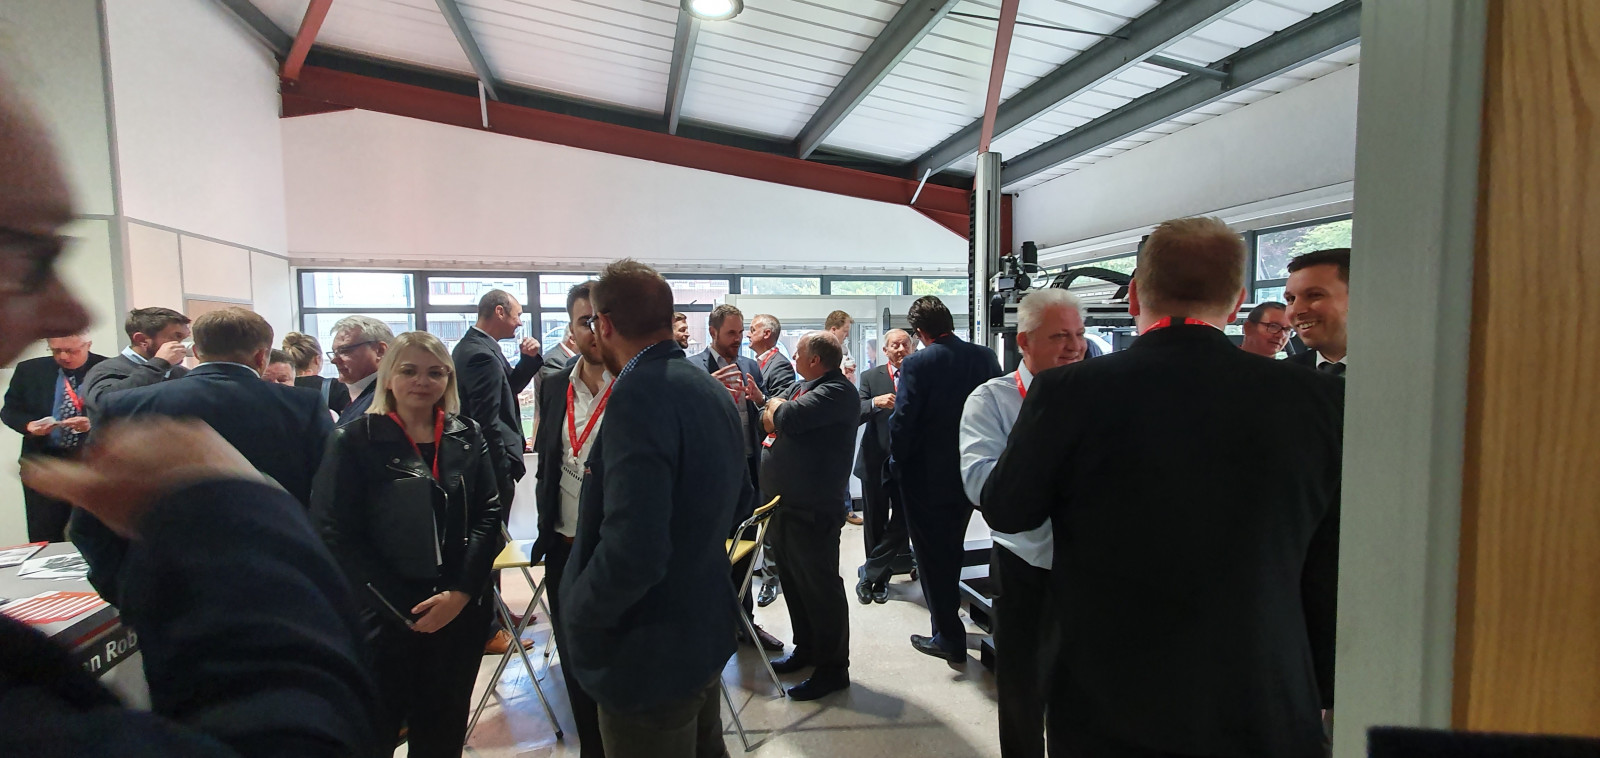 #Gallery: Bauromat UK Limited Best Practice Event